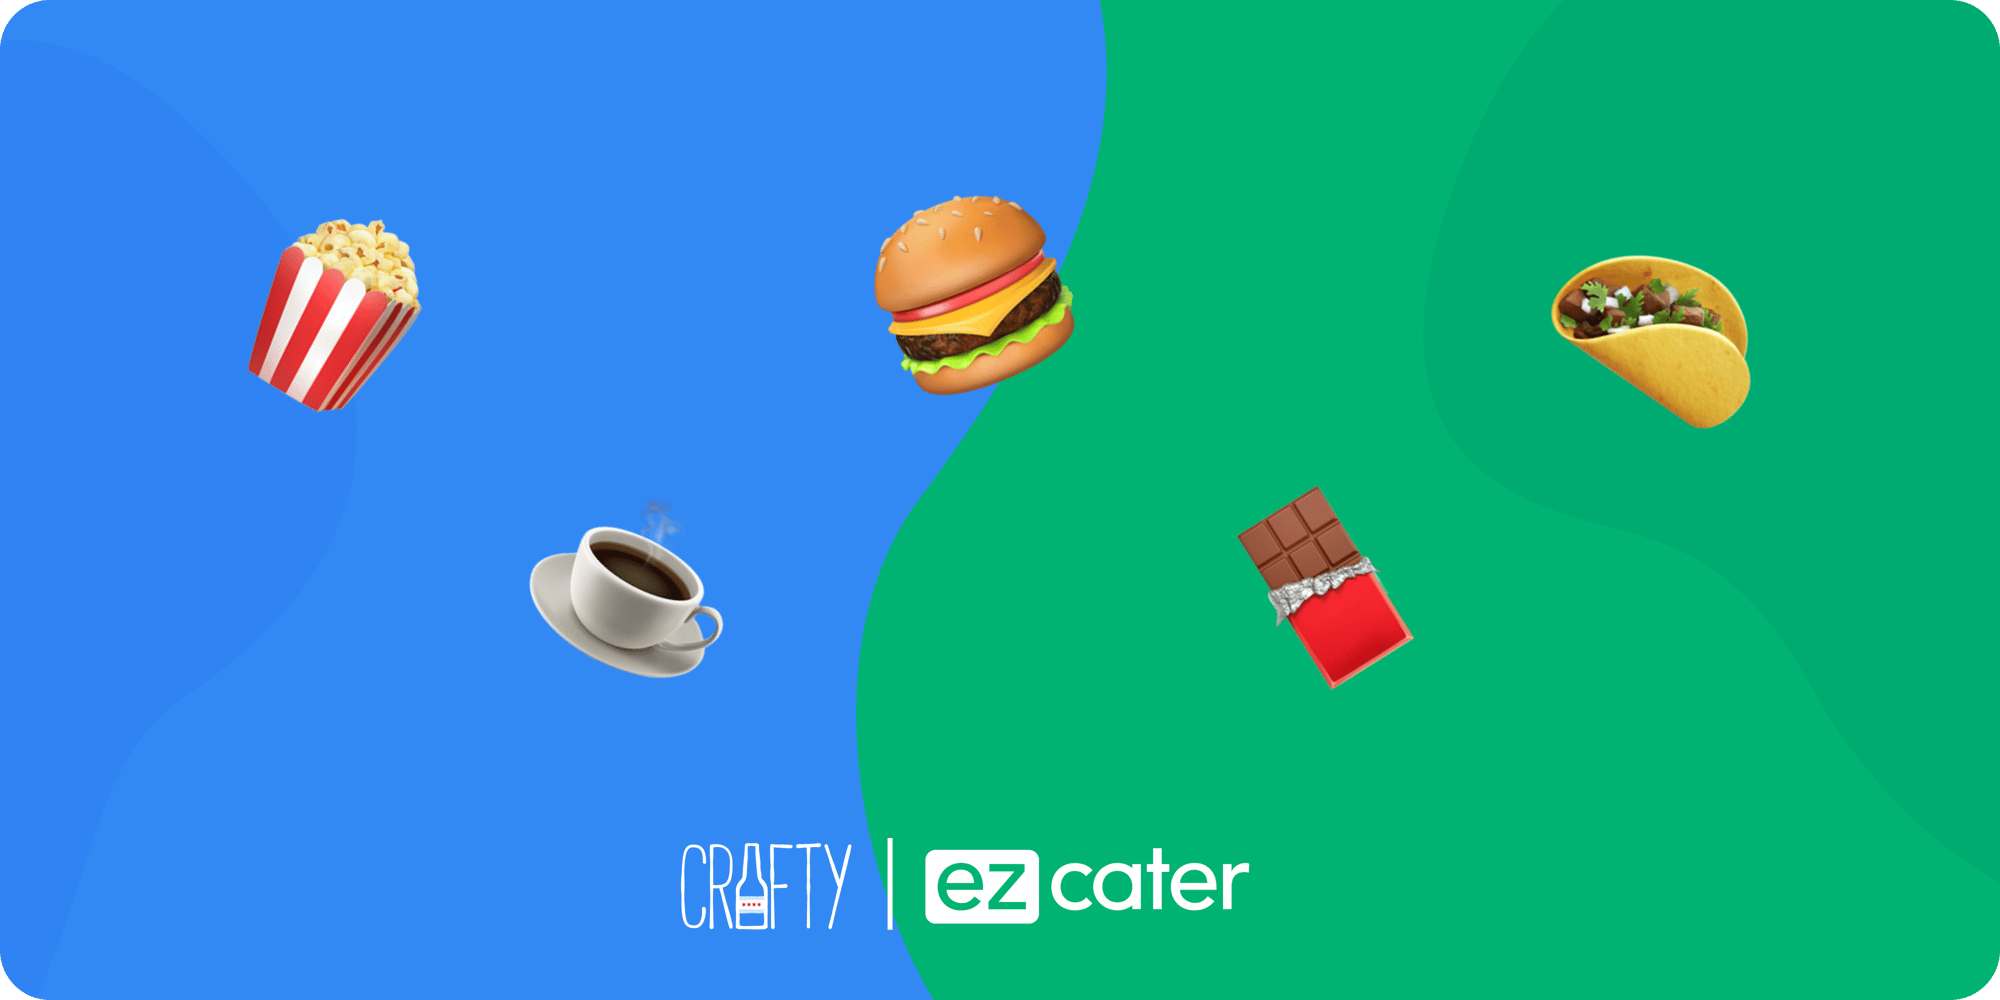 Crafty and ezCater Partner to Offer a One-Stop Shop for Business Catering and Office Snacks